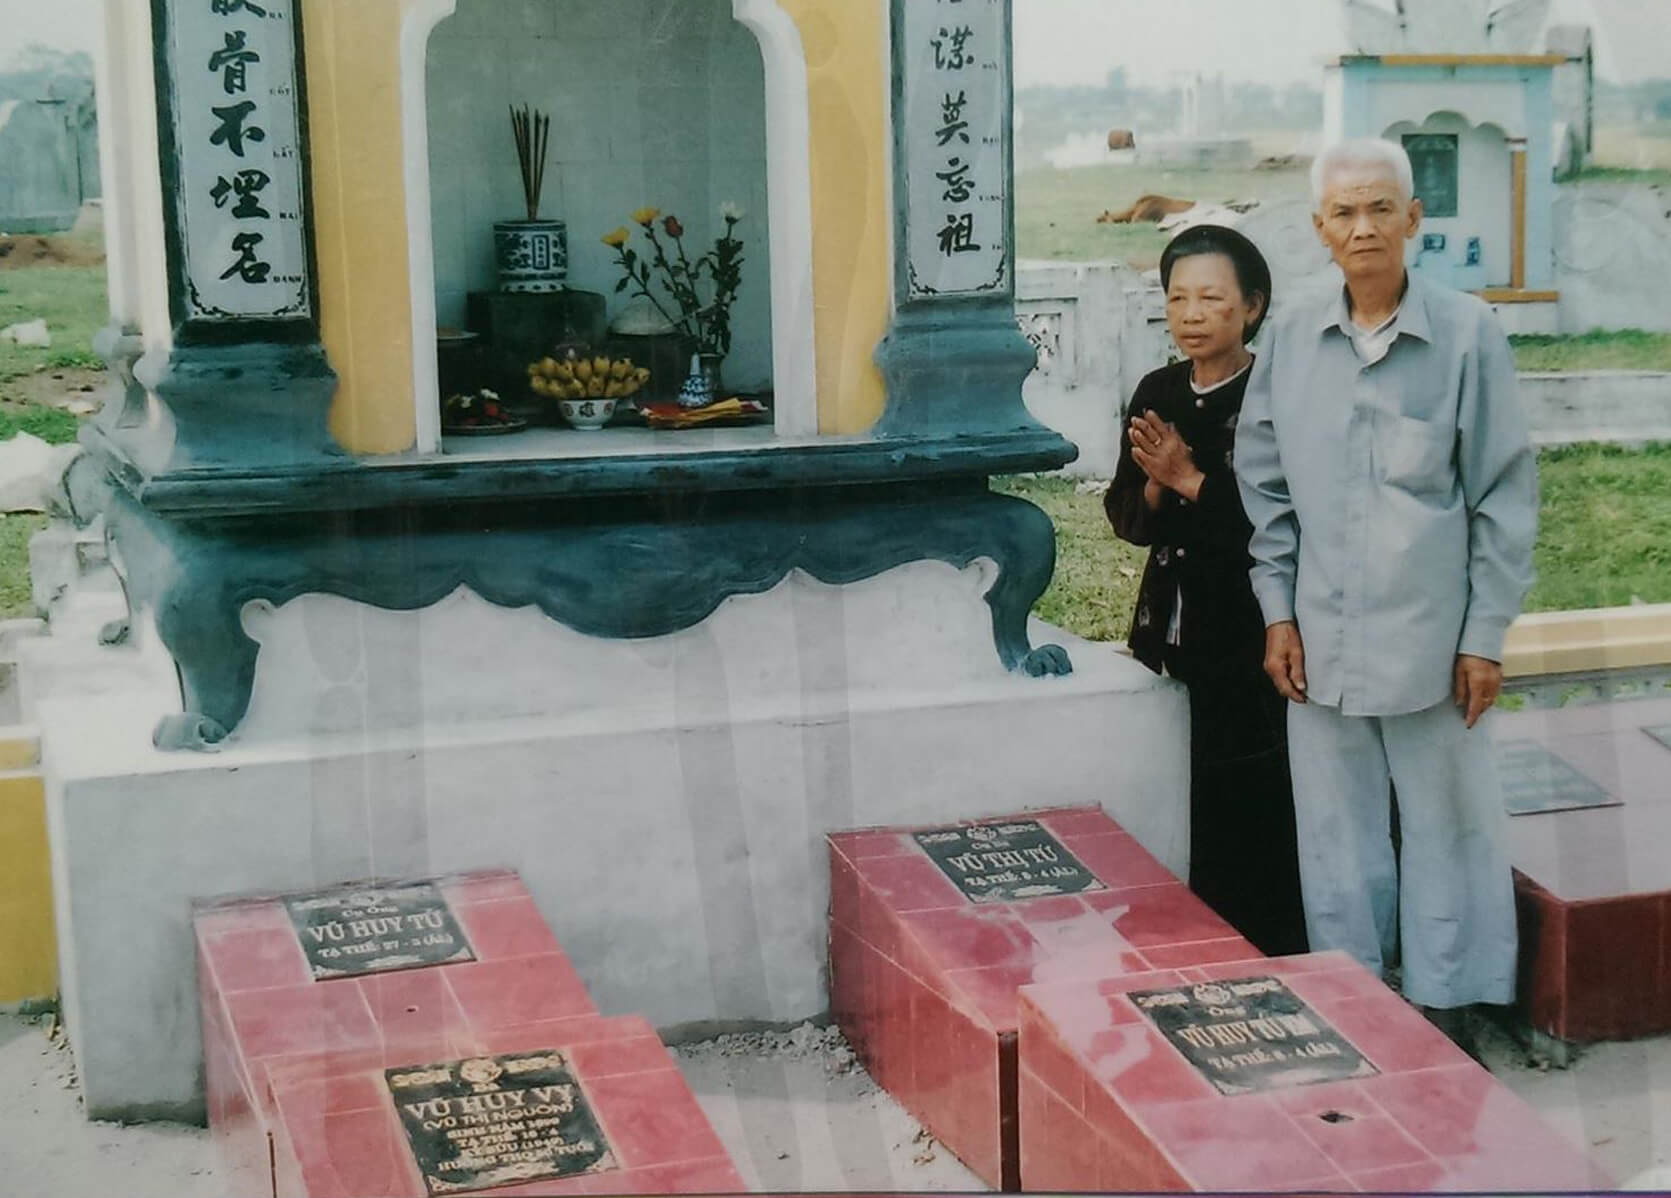 Vietnamese couple in front of an altar in a cemetery.